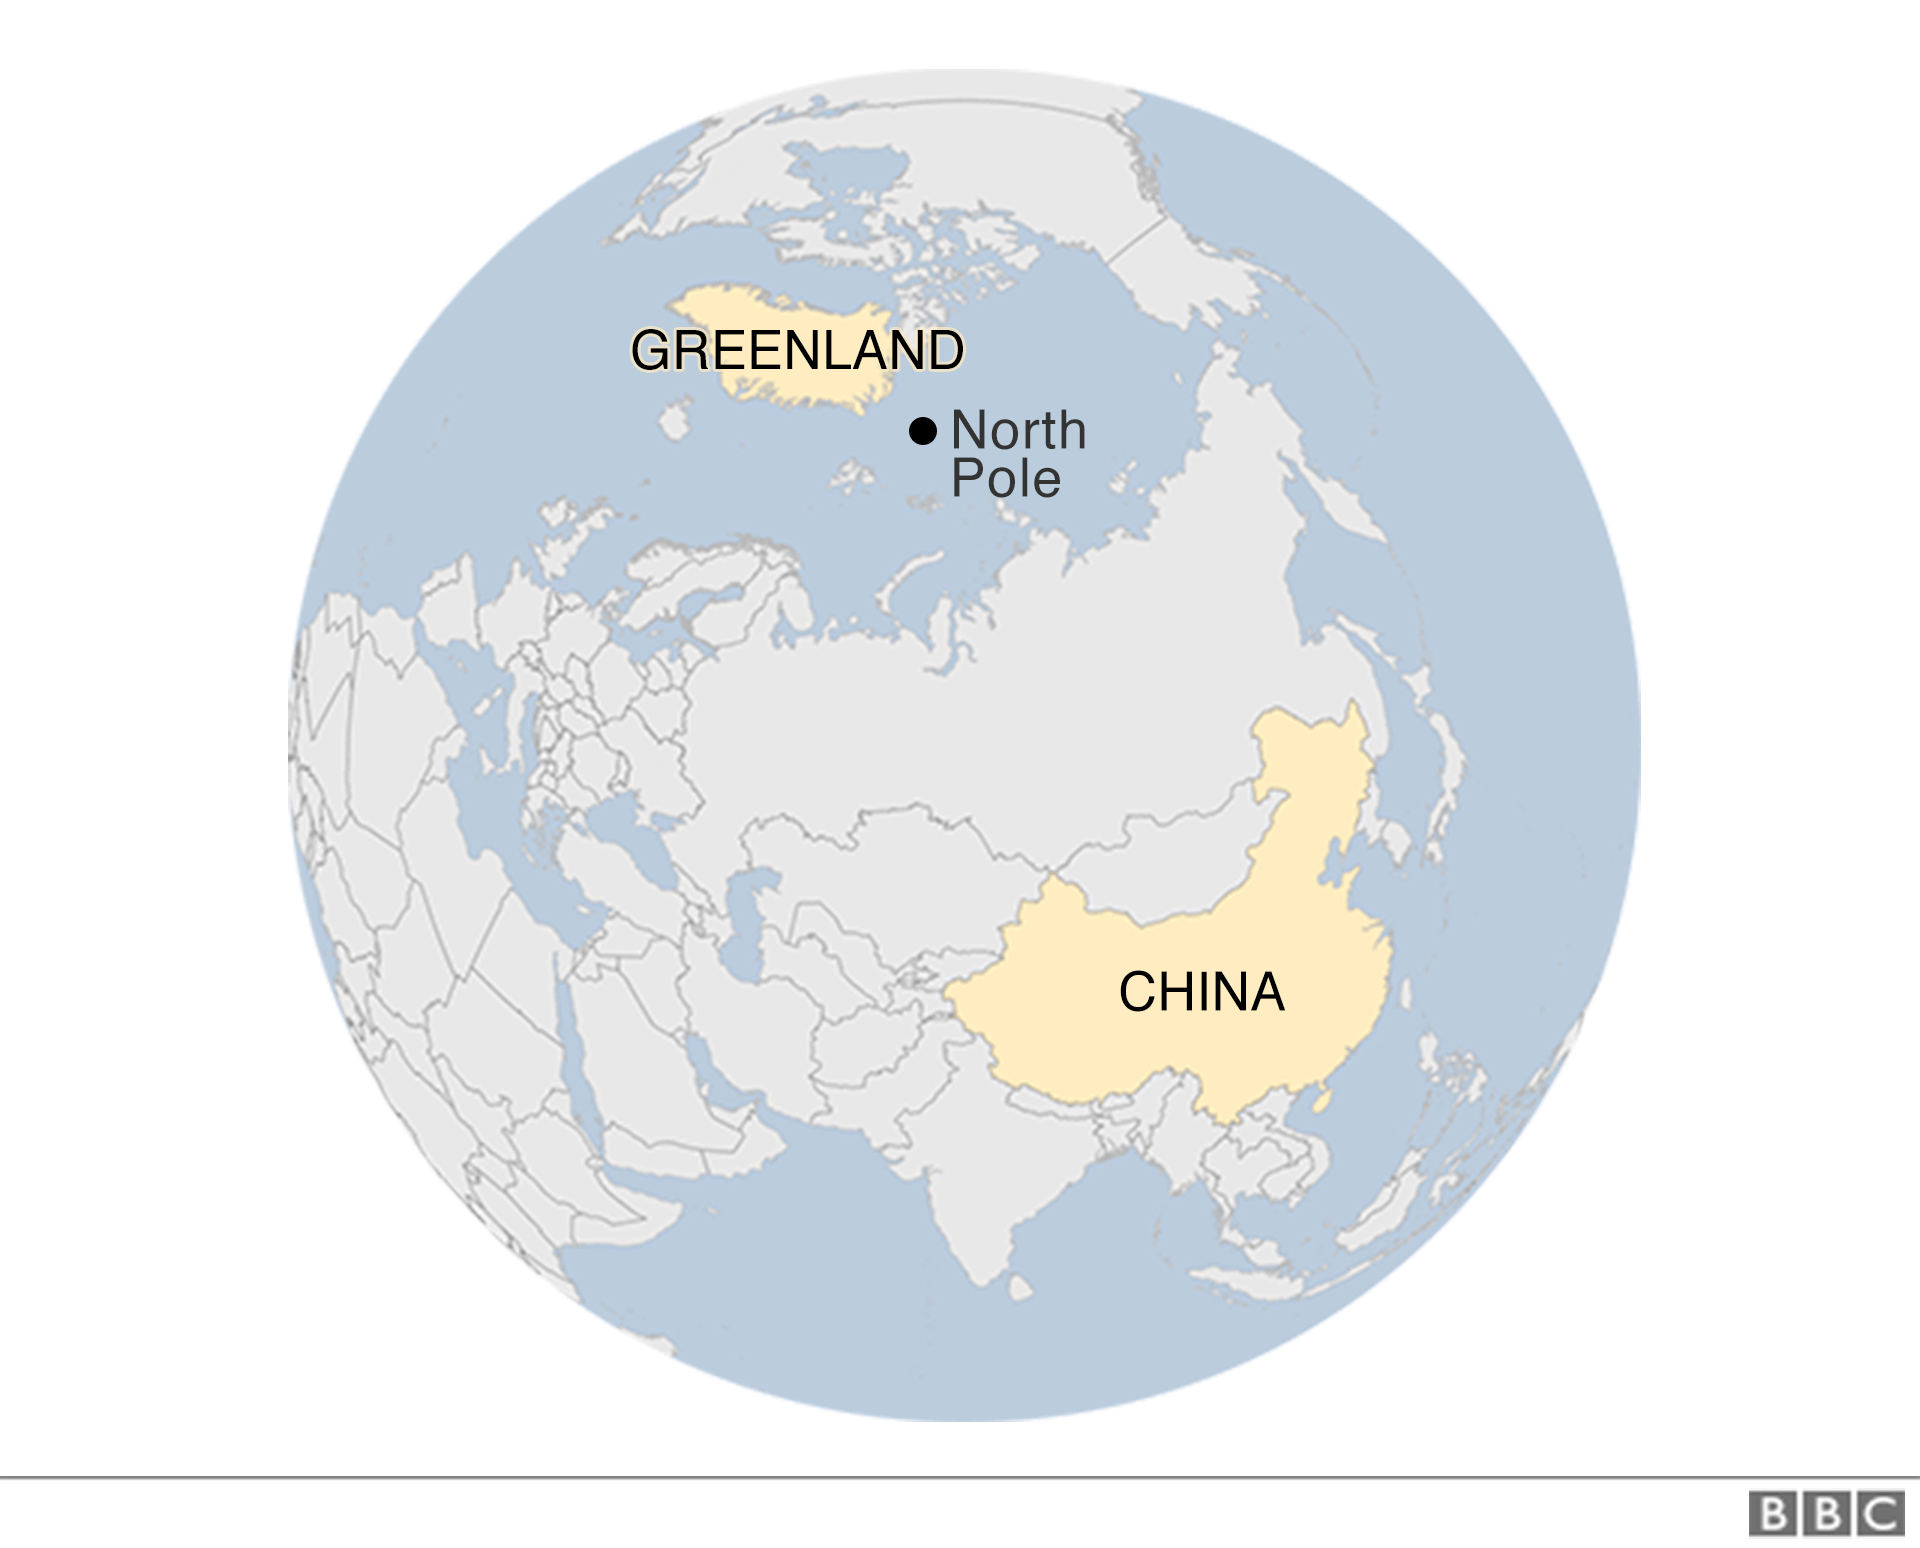 A map is seen on a curved globe surface of the earth -Greenland is marked on the top, just a short distance from the North Pole, also marked - and China's location has two extremely large nations of Mongolia and Russia between it and the pole